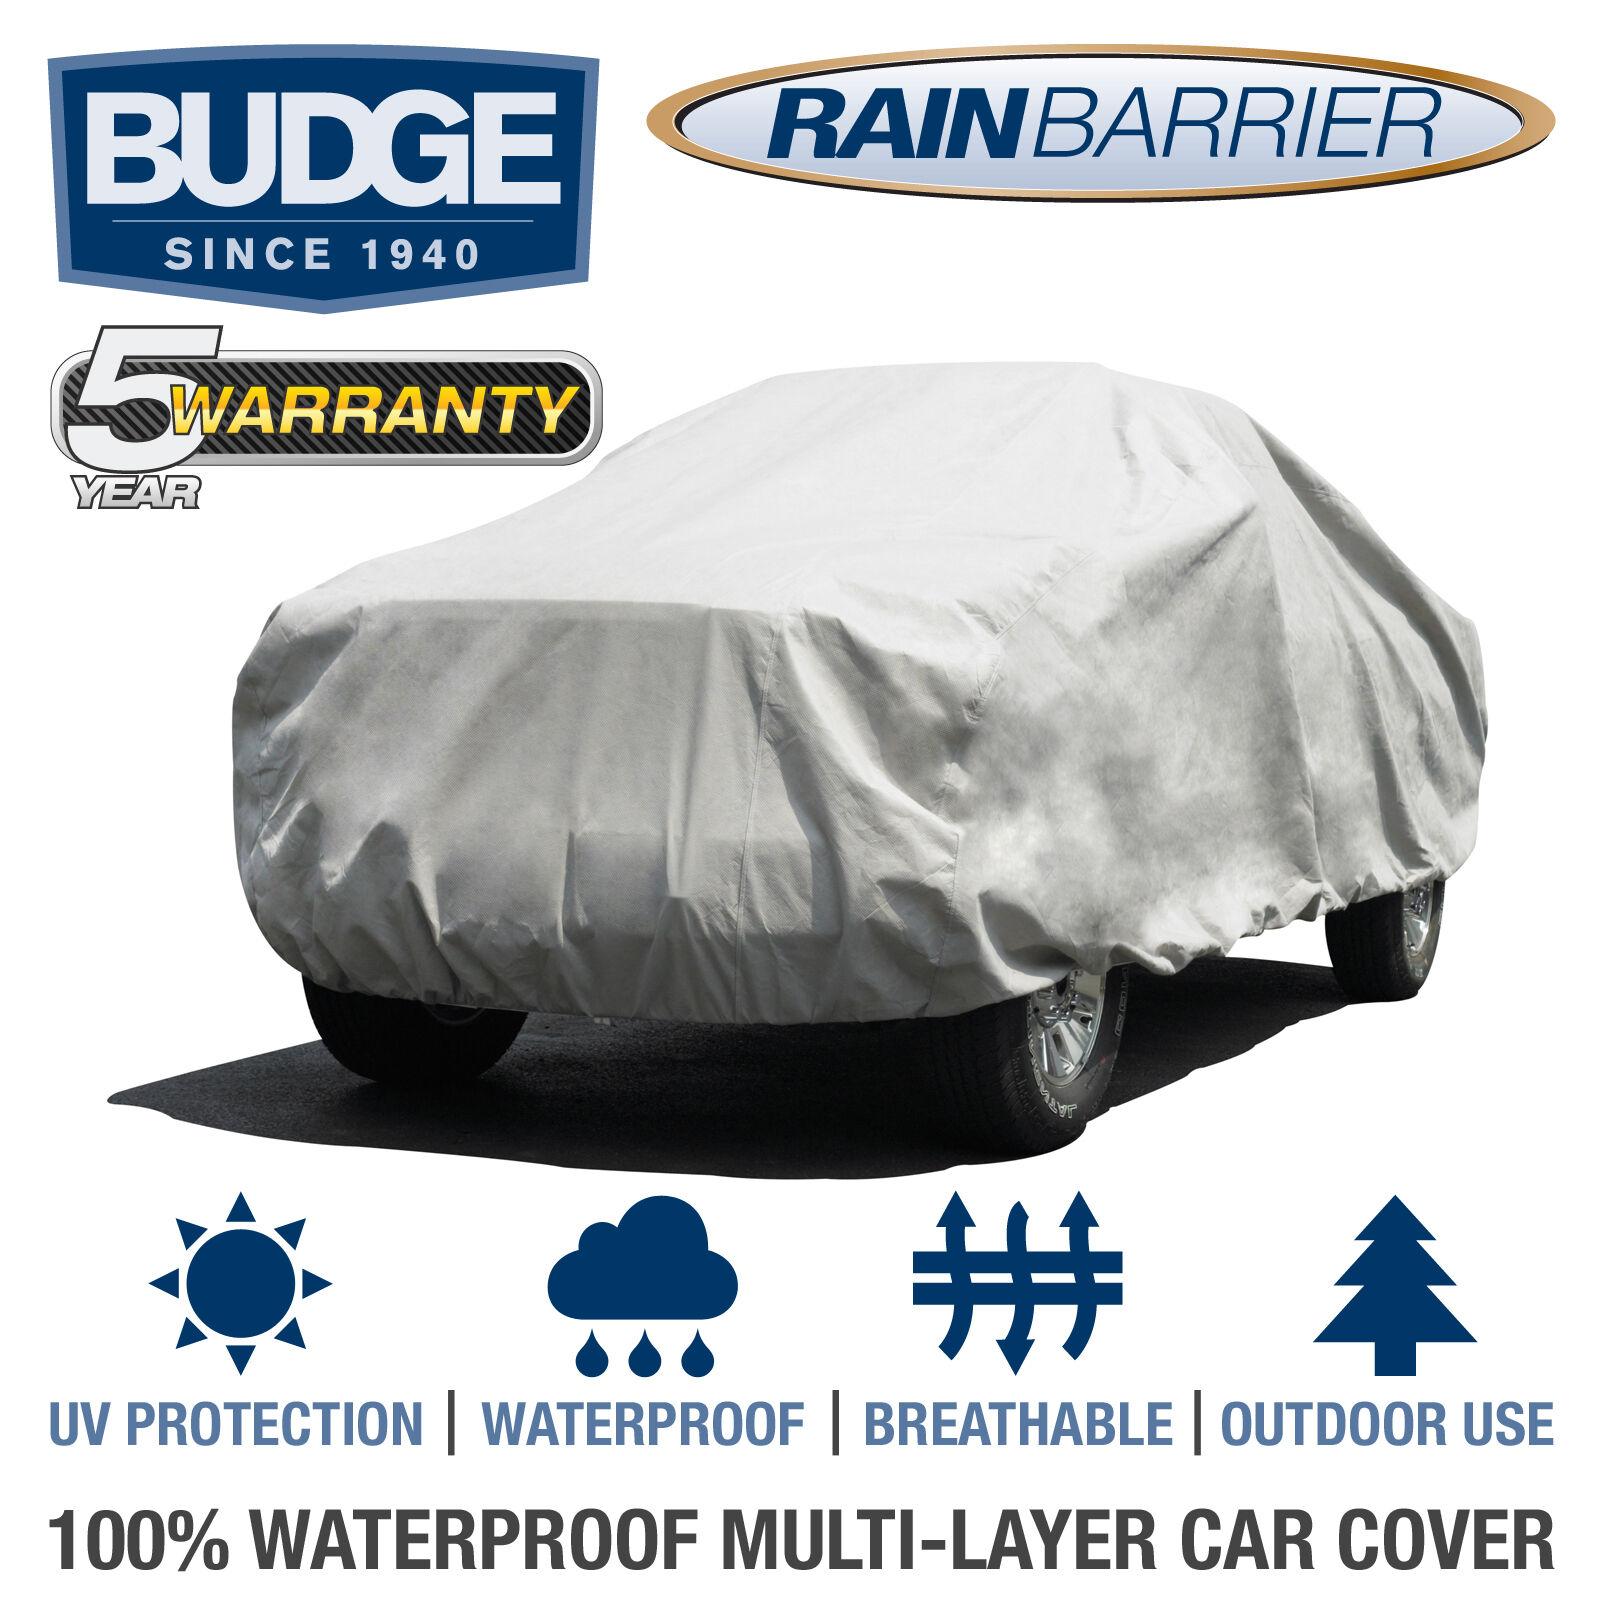 Budge Rain Barrier Truck Cover Fits Long Bed Crew Cab up to 22\' Long |Waterproof